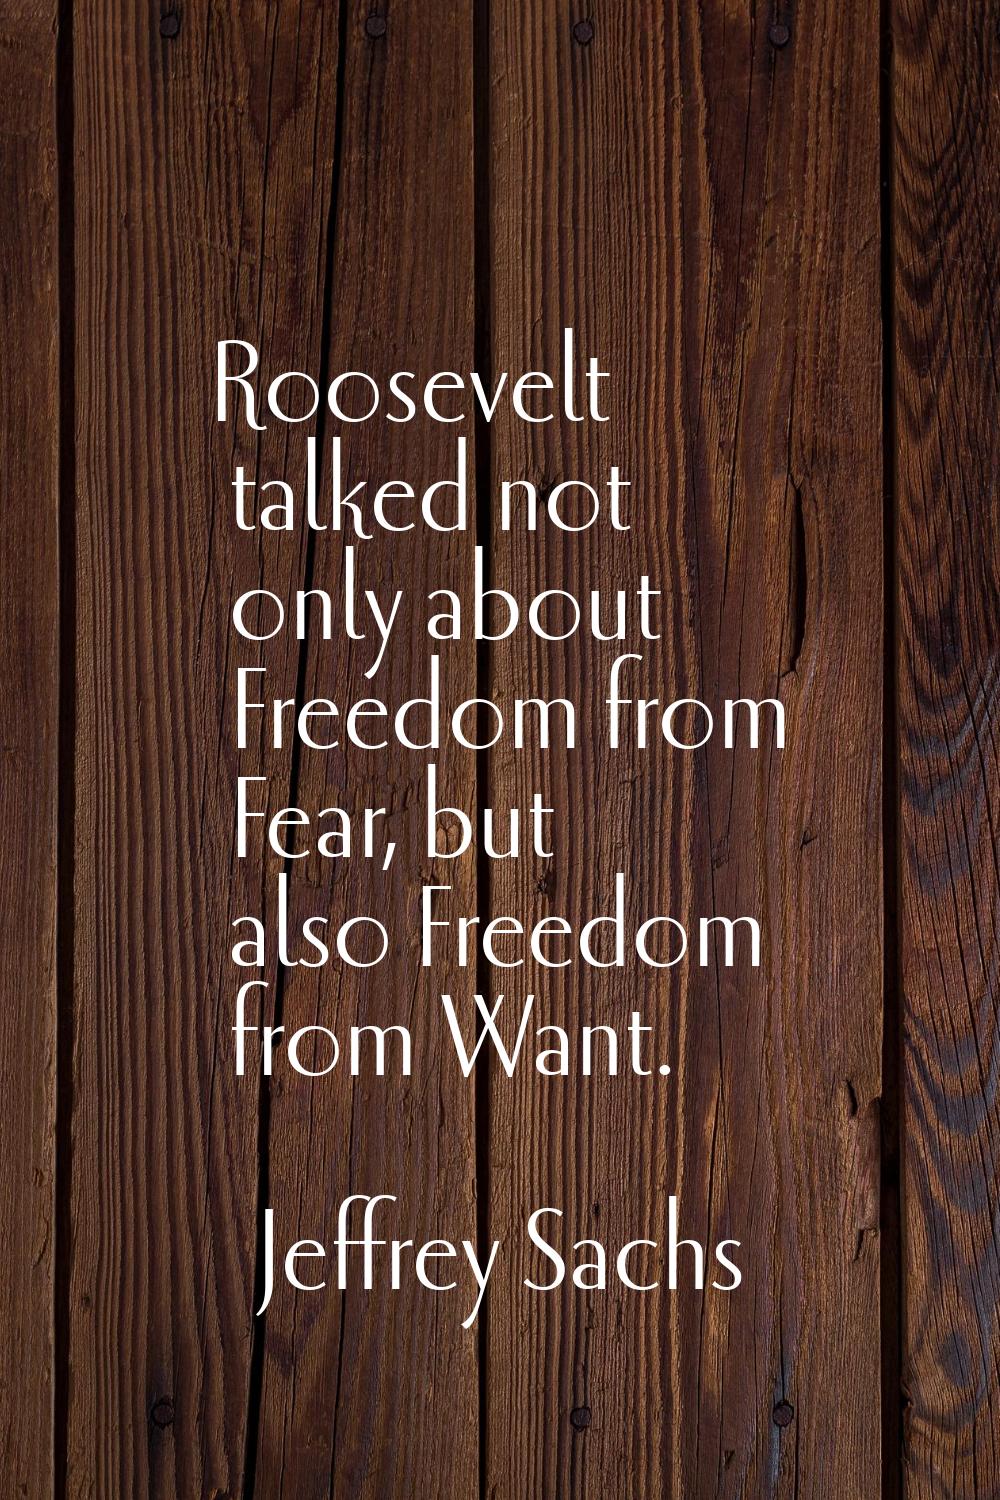 Roosevelt talked not only about Freedom from Fear, but also Freedom from Want.